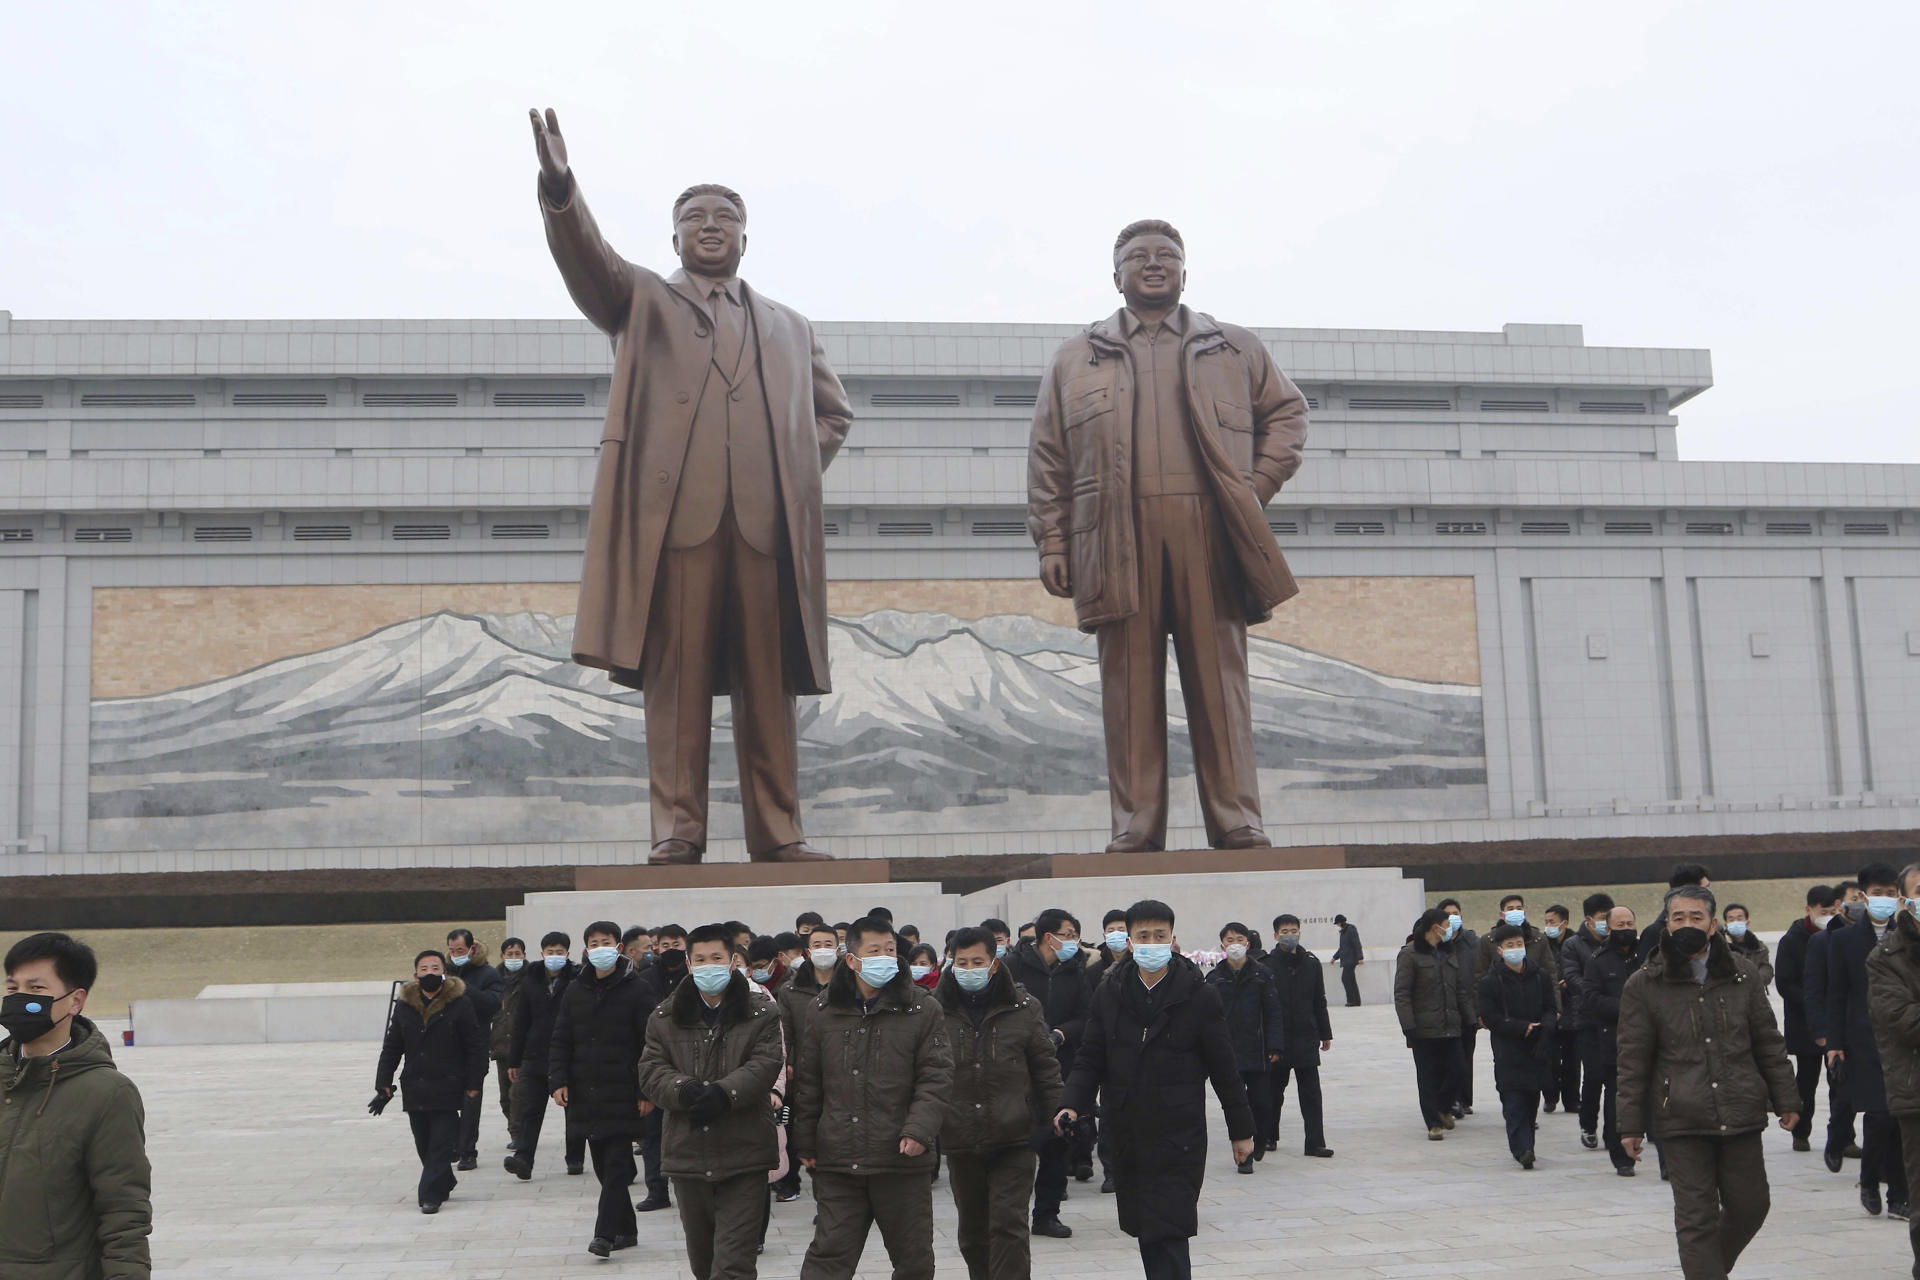 North Koreans pay their respects to former leaders Kim Il-sung and Kim Jong-il, on Mansu Hill, in Pyongyang, North Korea, January 22, 2023.